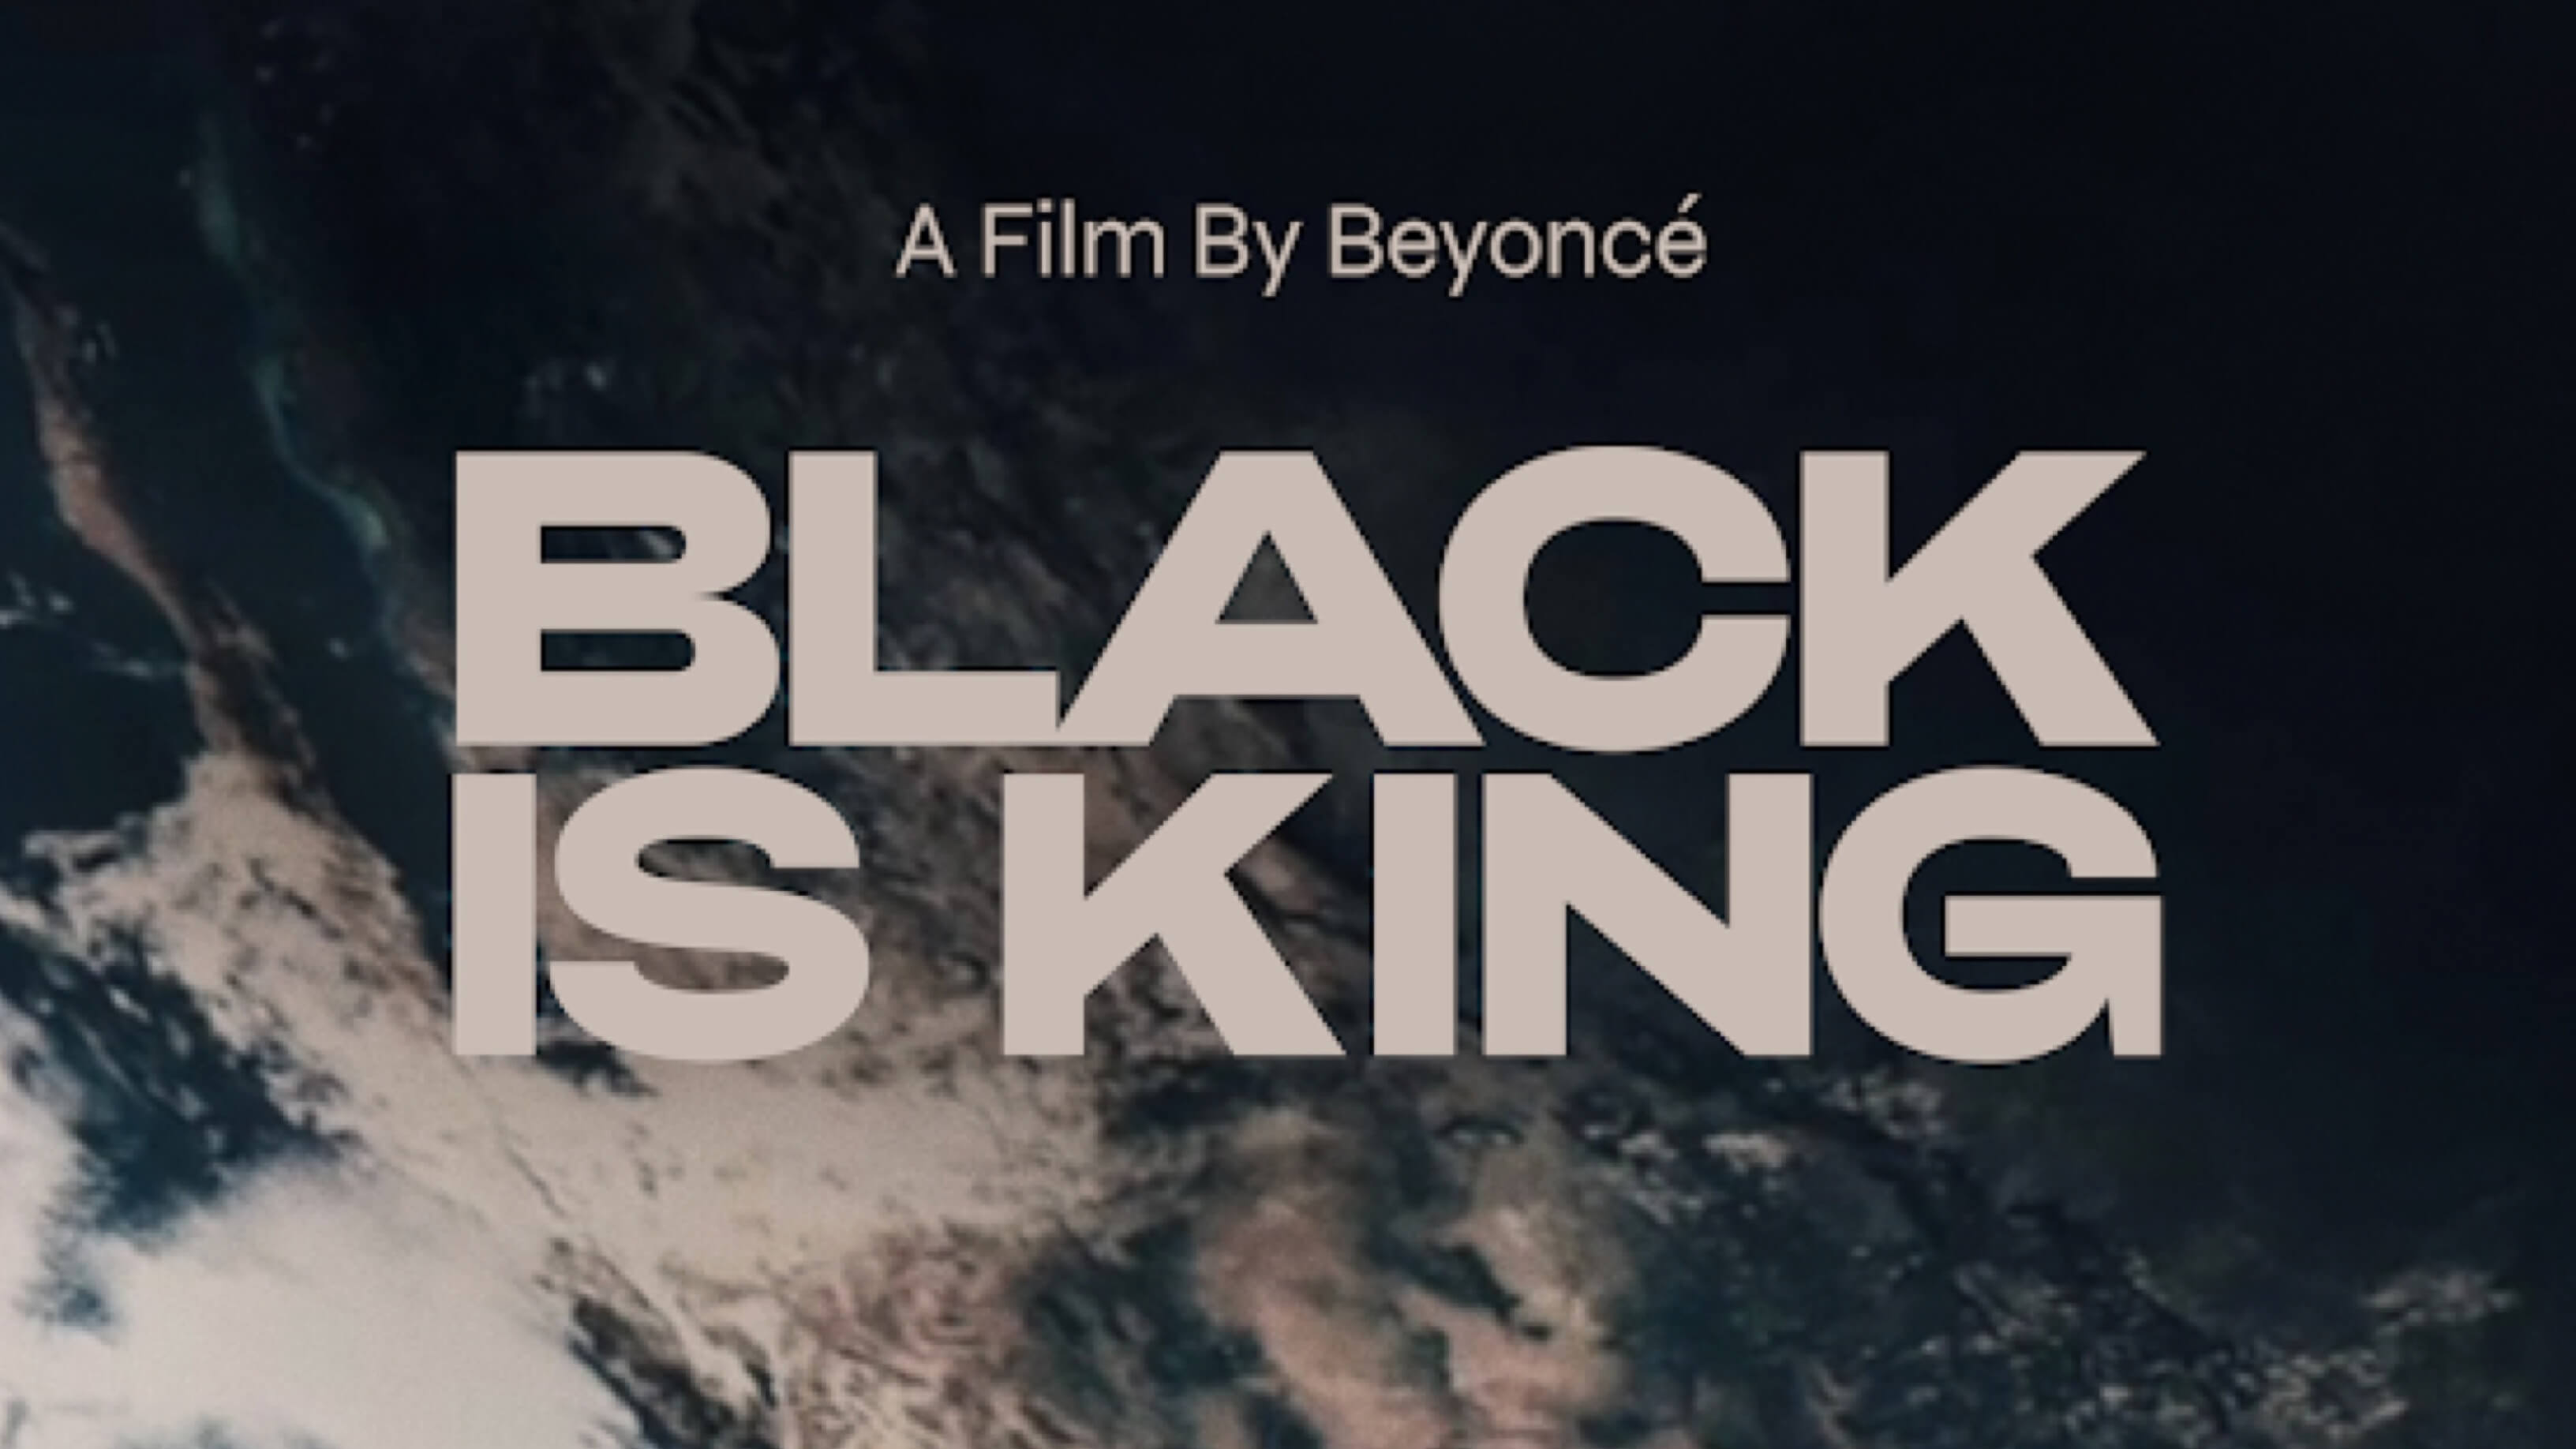 New Trailer and Poster For ‘Black Is King’ Released